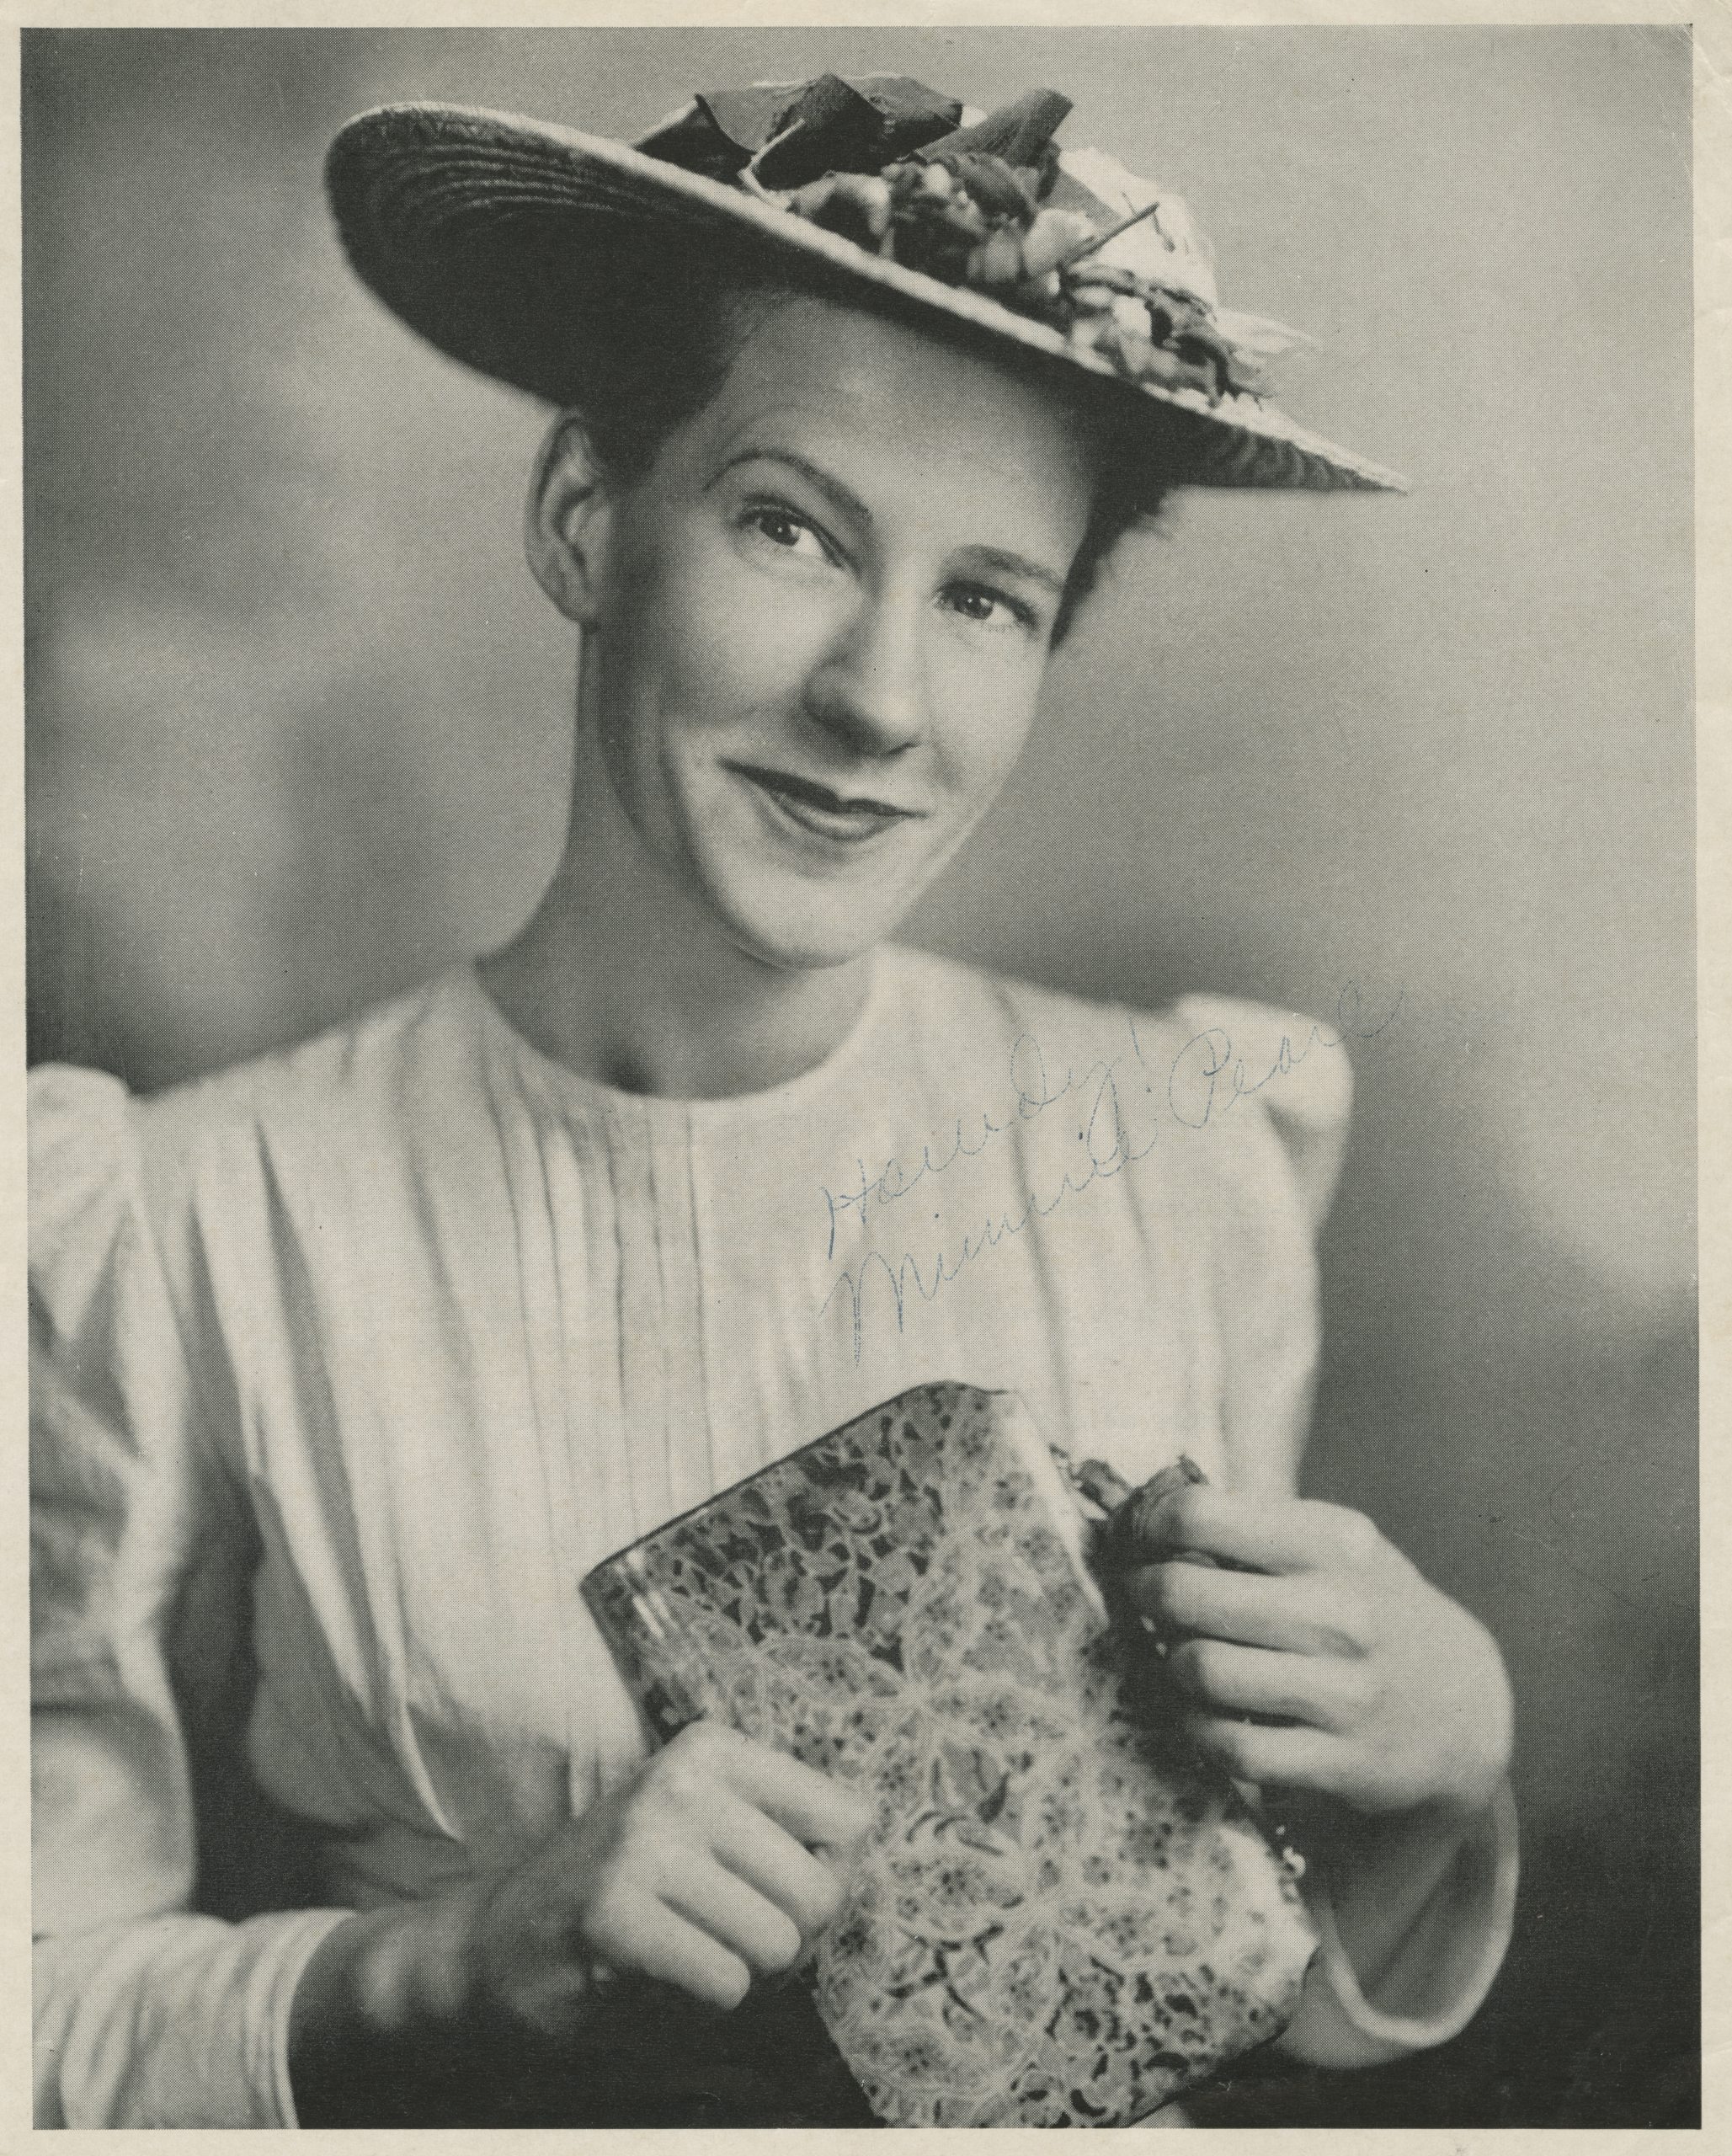 Photo of Grand Ole Opry comedienne and longtime star Minnie Pearl was part of the images requested by the researchers who combed the Southern Folklife Collection for the eight-episode Country Music documentary airing on PBS. Photo courtesy of John Edwards Memorial Foundation Records (20001), Southern Folklife Collection at Wilson Special Collections Library, University Libraries.